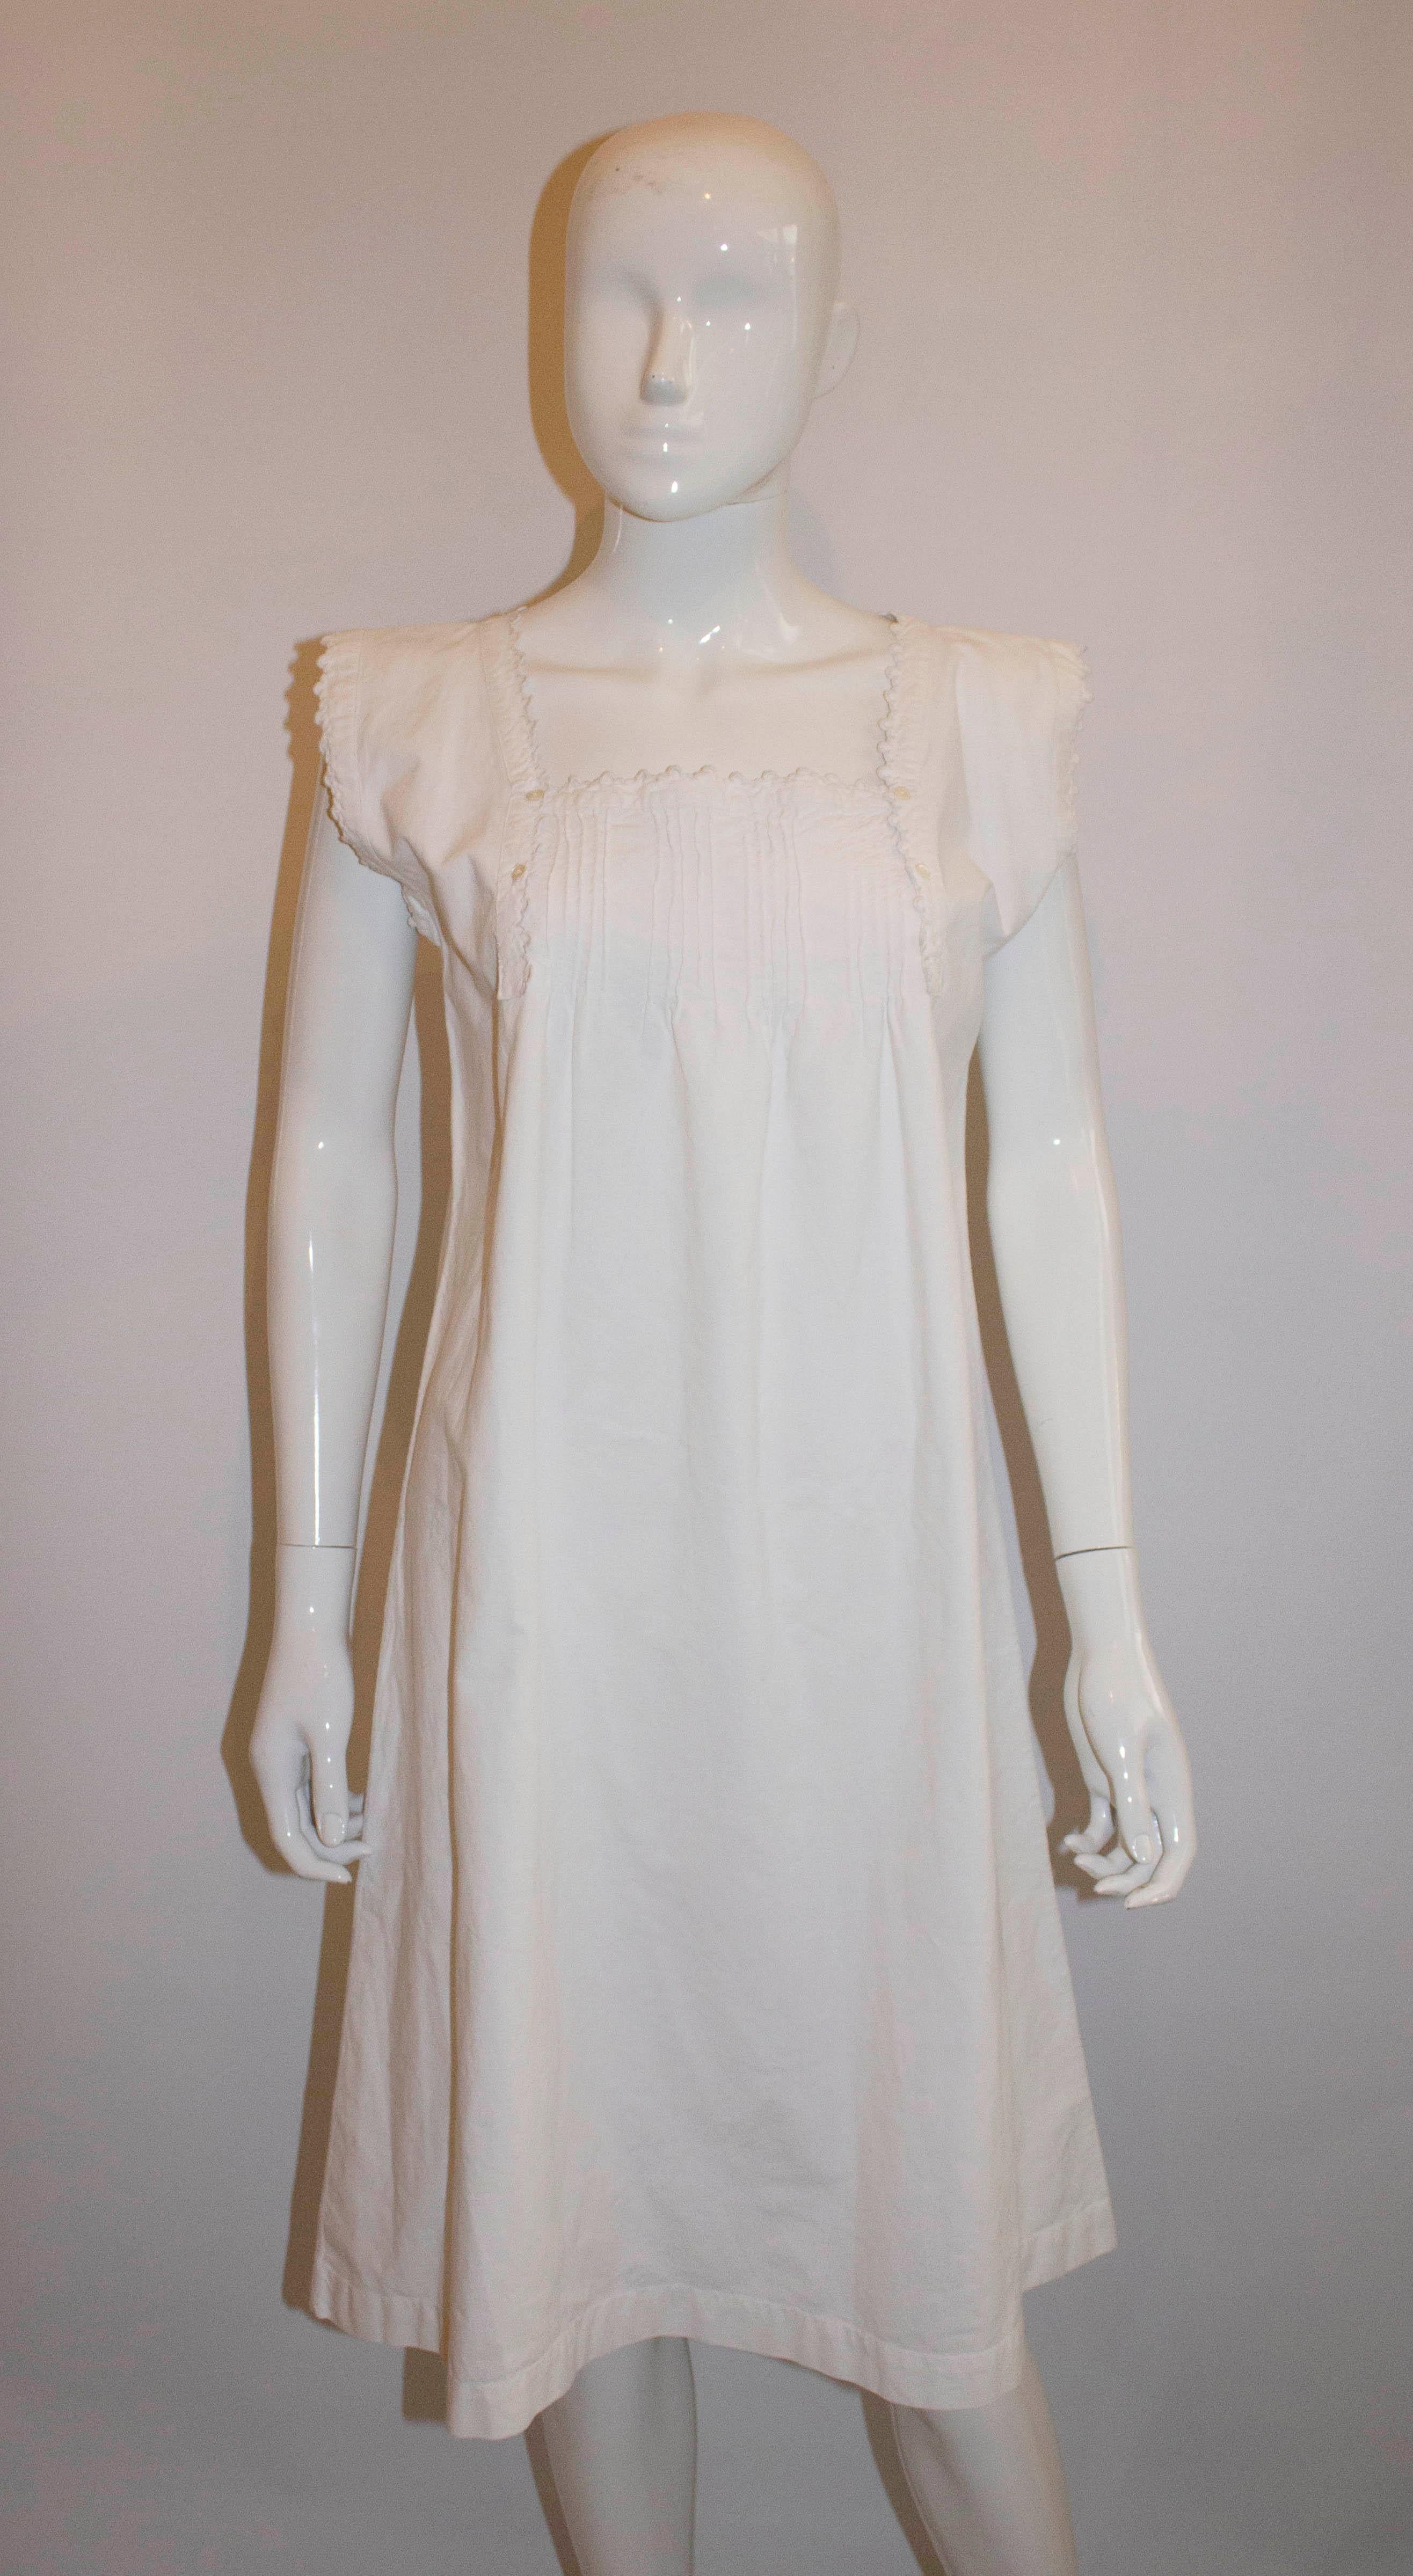 A great vintage dress for Summer. This vintage dress from France, is made of a heavy cotton with a low square neckline and pintucks at the front. It has decorative edging along the front and back and arm holes. 
Bust up to 41'', length 41''